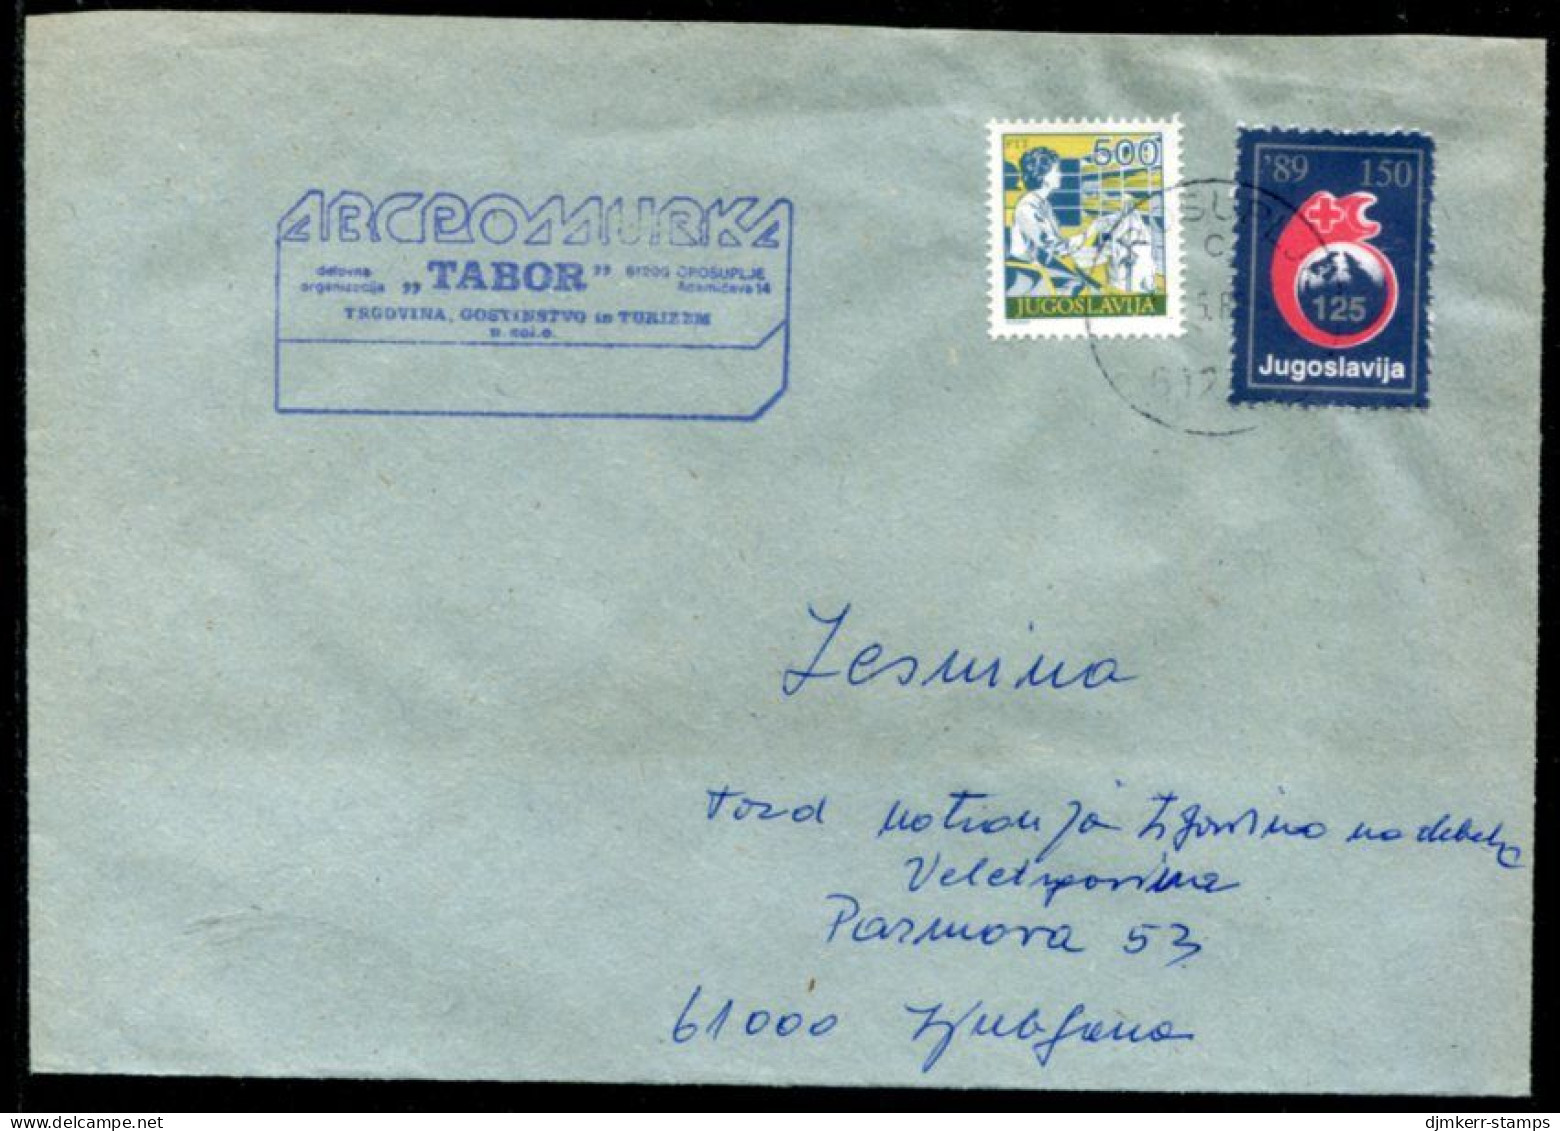 YUGOSLAVIA 1989 Commercial Cover With Red Cross Week 150 D Tax.  Michel ZZM 169 - Liefdadigheid